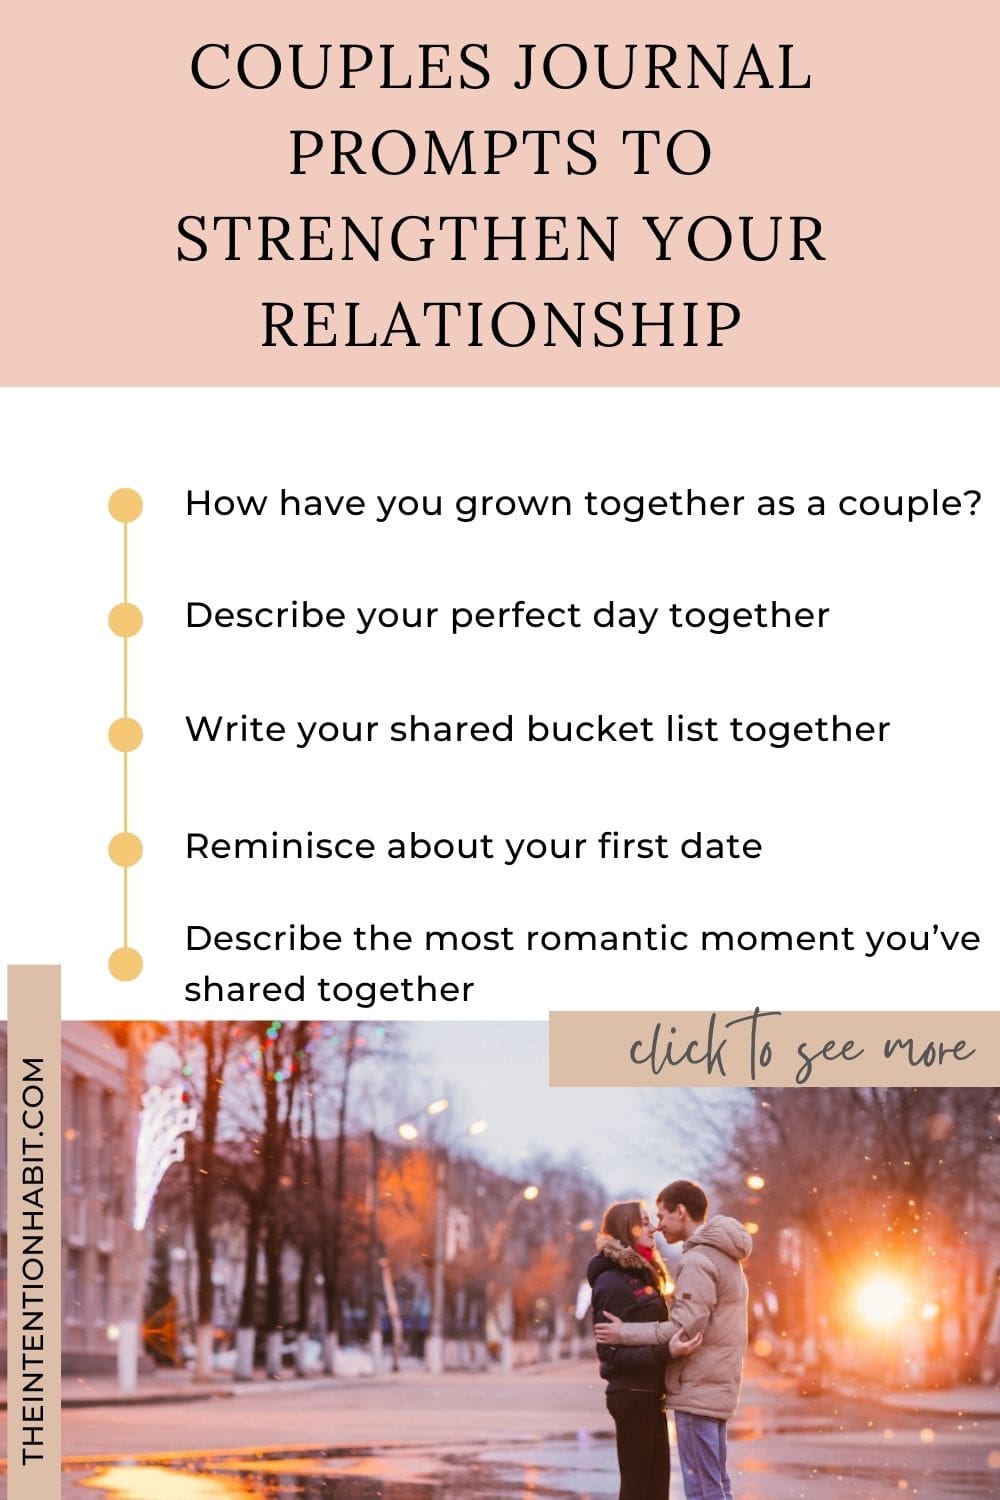 5 Ways couples benefit from a relationship journal